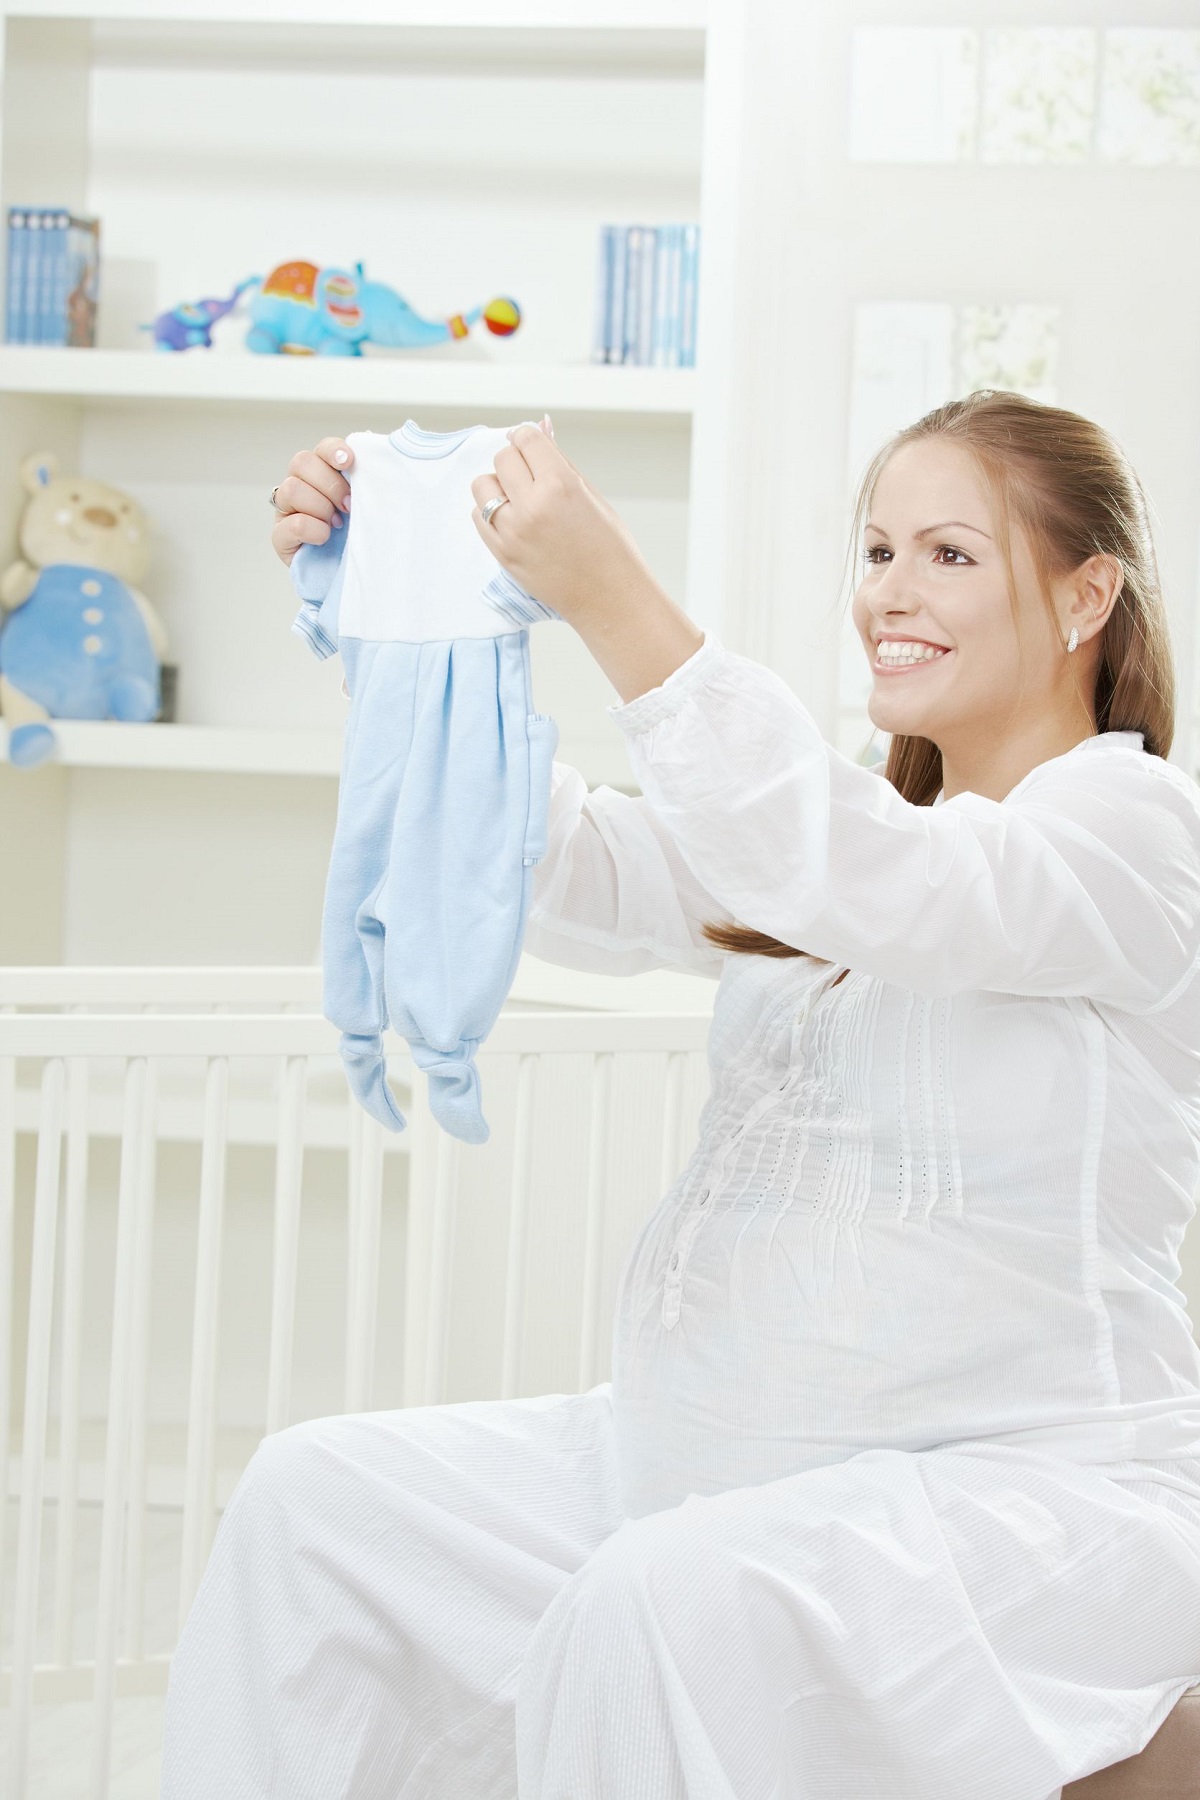 Plus One: 4 Tips To Get Ready For Your New Baby